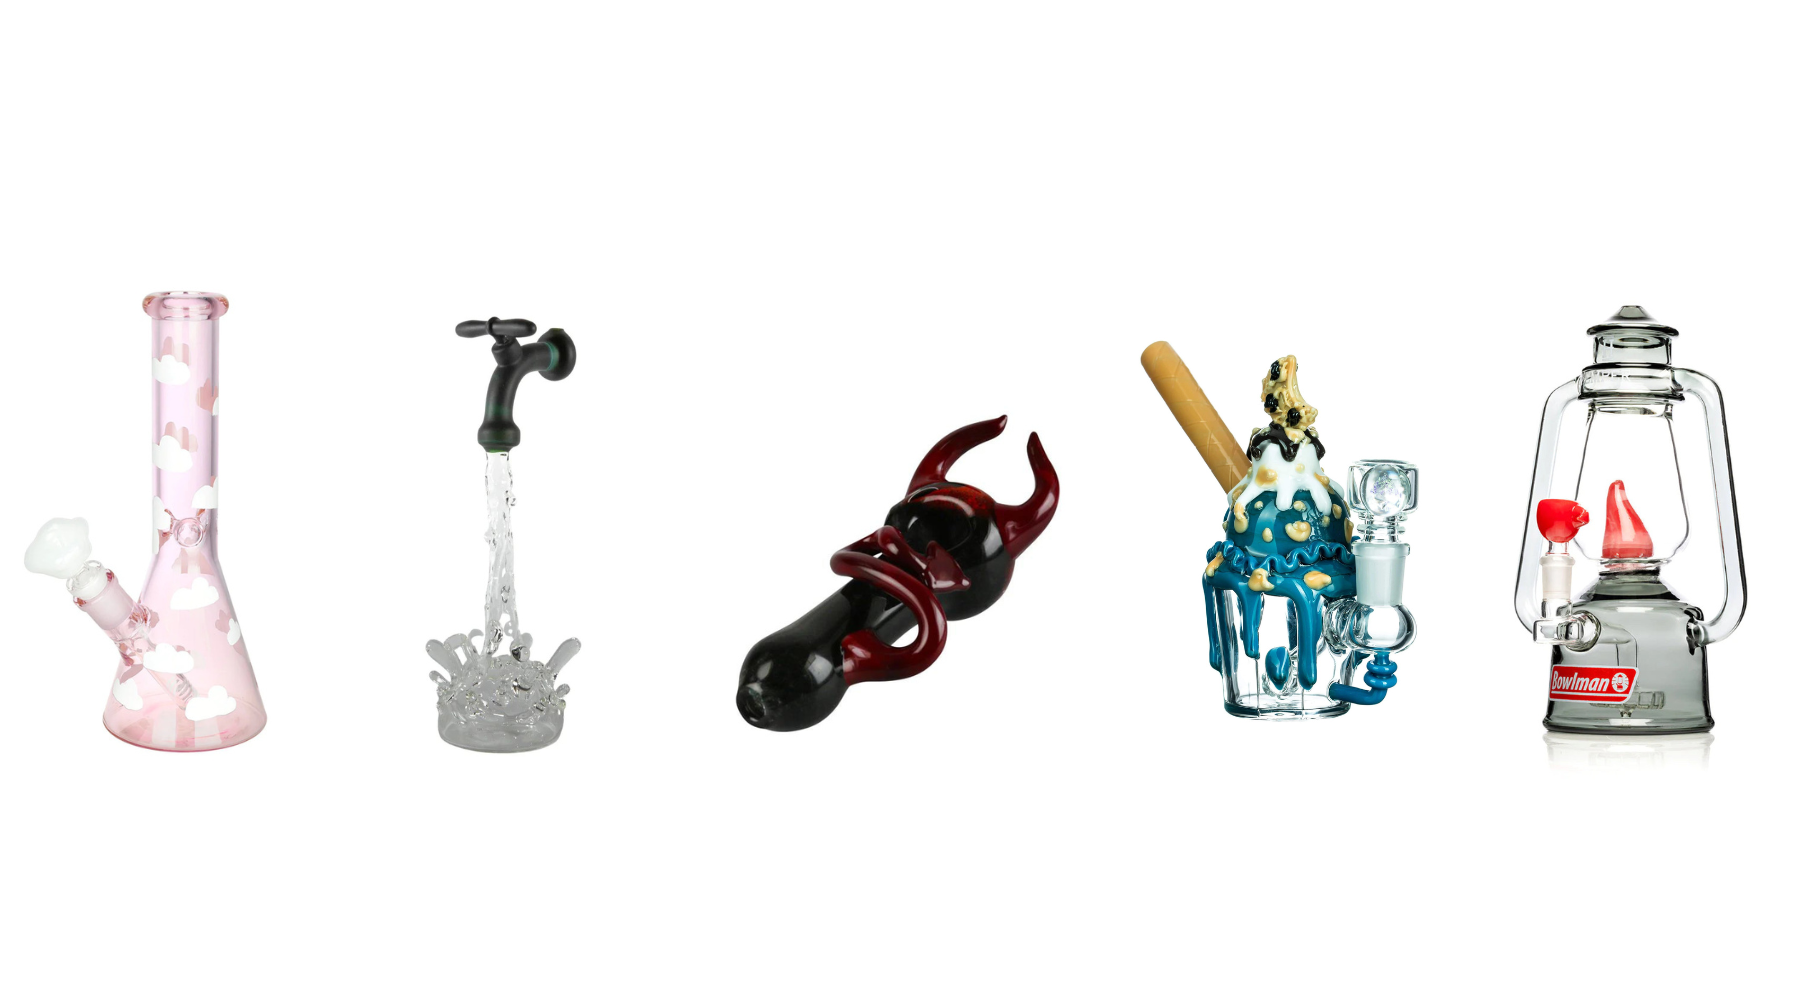 Themed Glass Bongs and Pipes